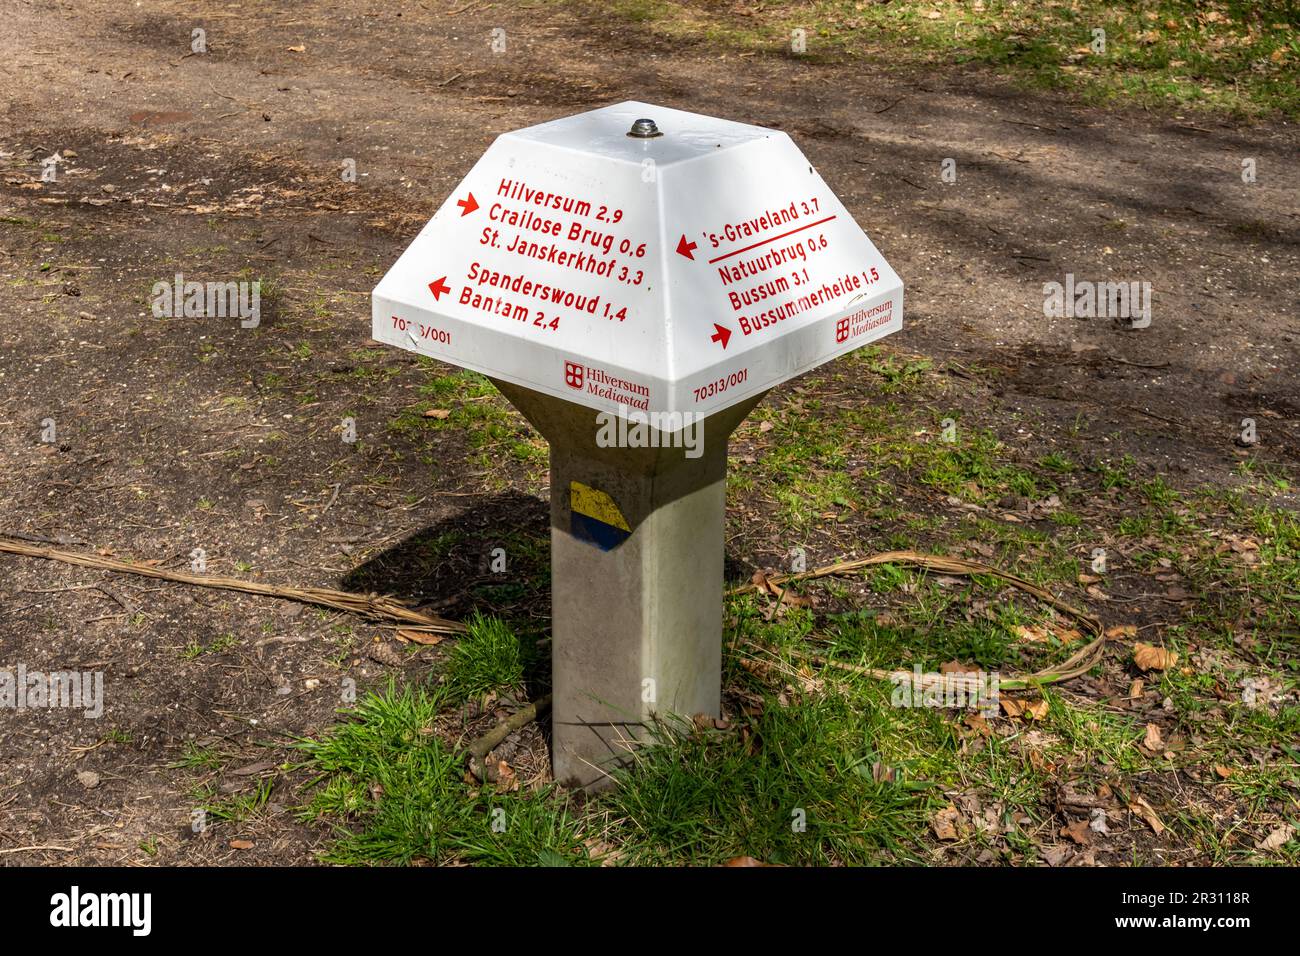 Route marker in shape of mushroom signpost designed for hikers and cyclists in Hilversum, Netherlands Stock Photo